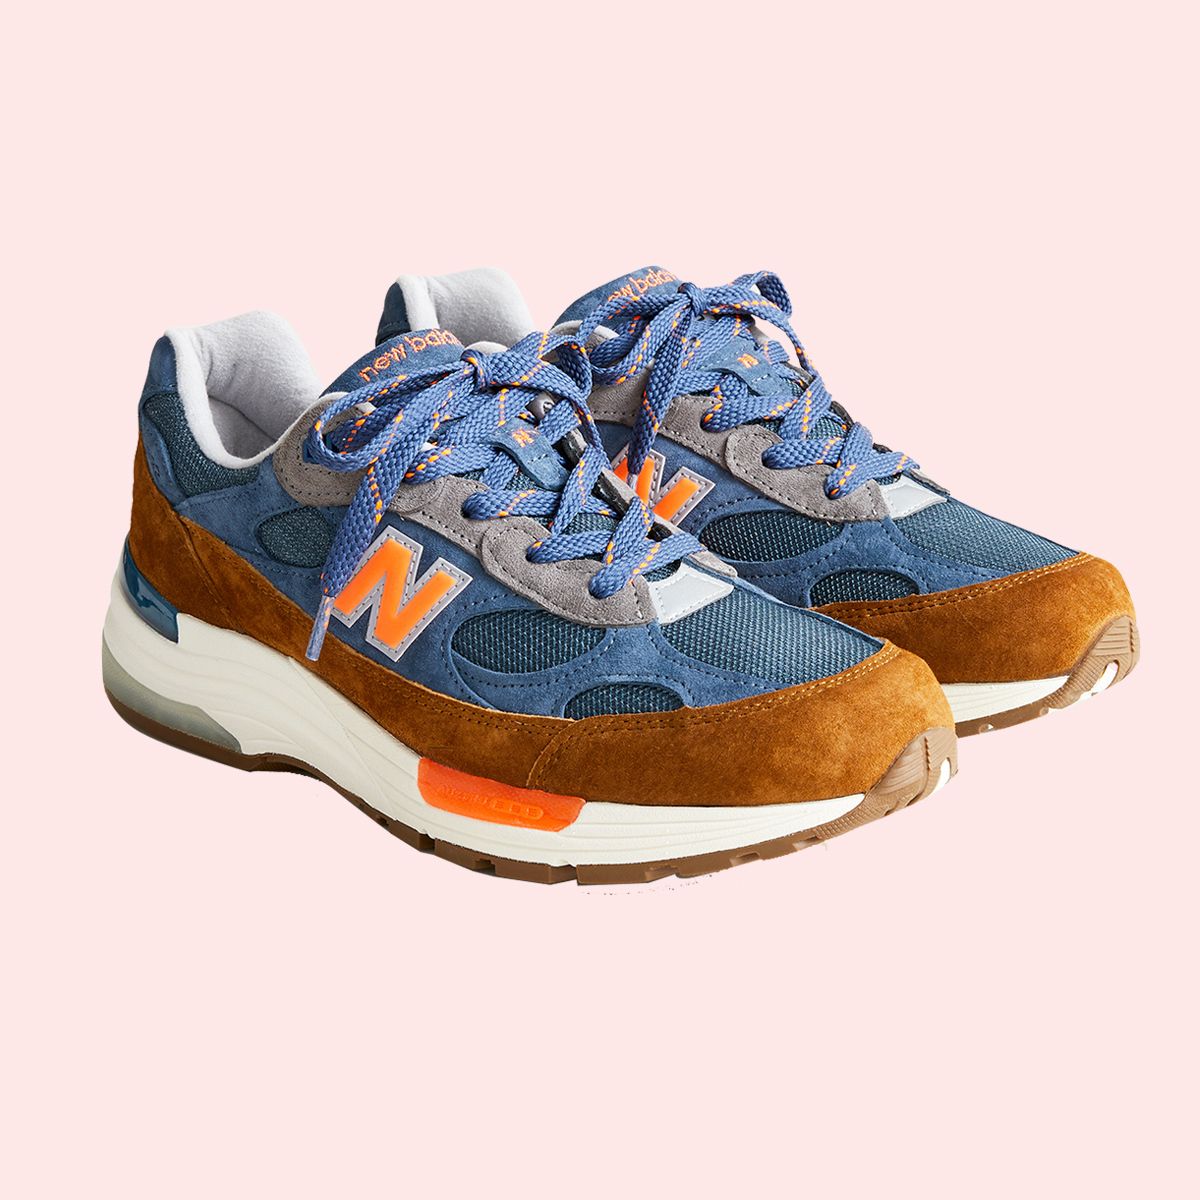 x J.Crew 992 New York Sneakers Release Date, Price, and Where to Buy